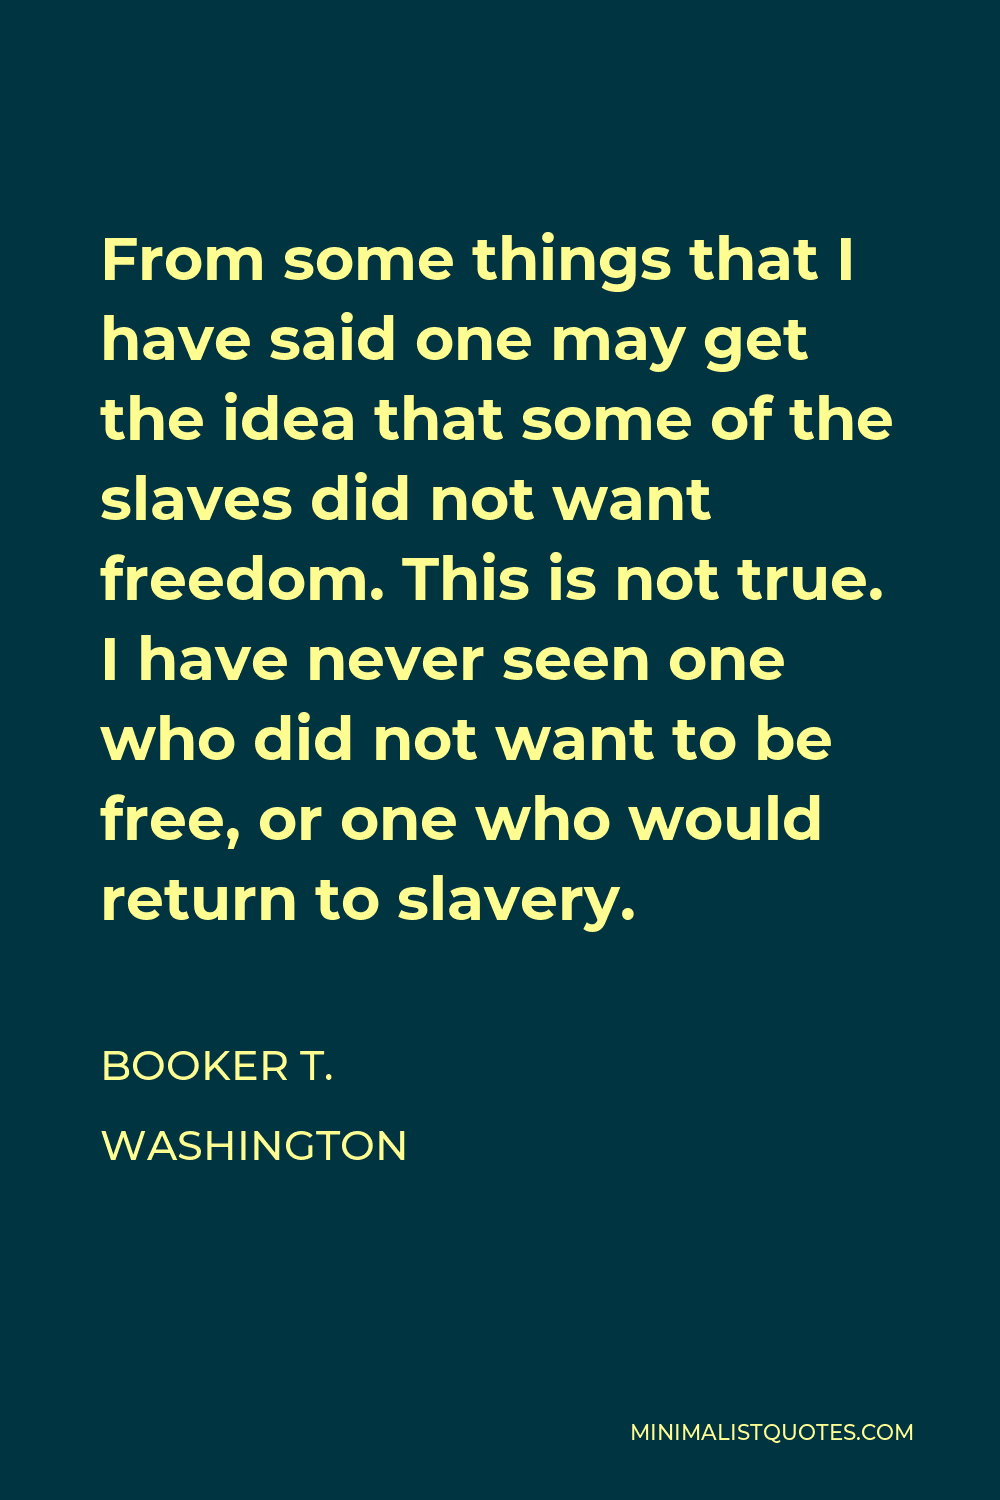 Booker T. Washington Quote - From some things that I have said one may get the idea that some of the slaves did not want freedom. This is not true. I have never seen one who did not want to be free, or one who would return to slavery.